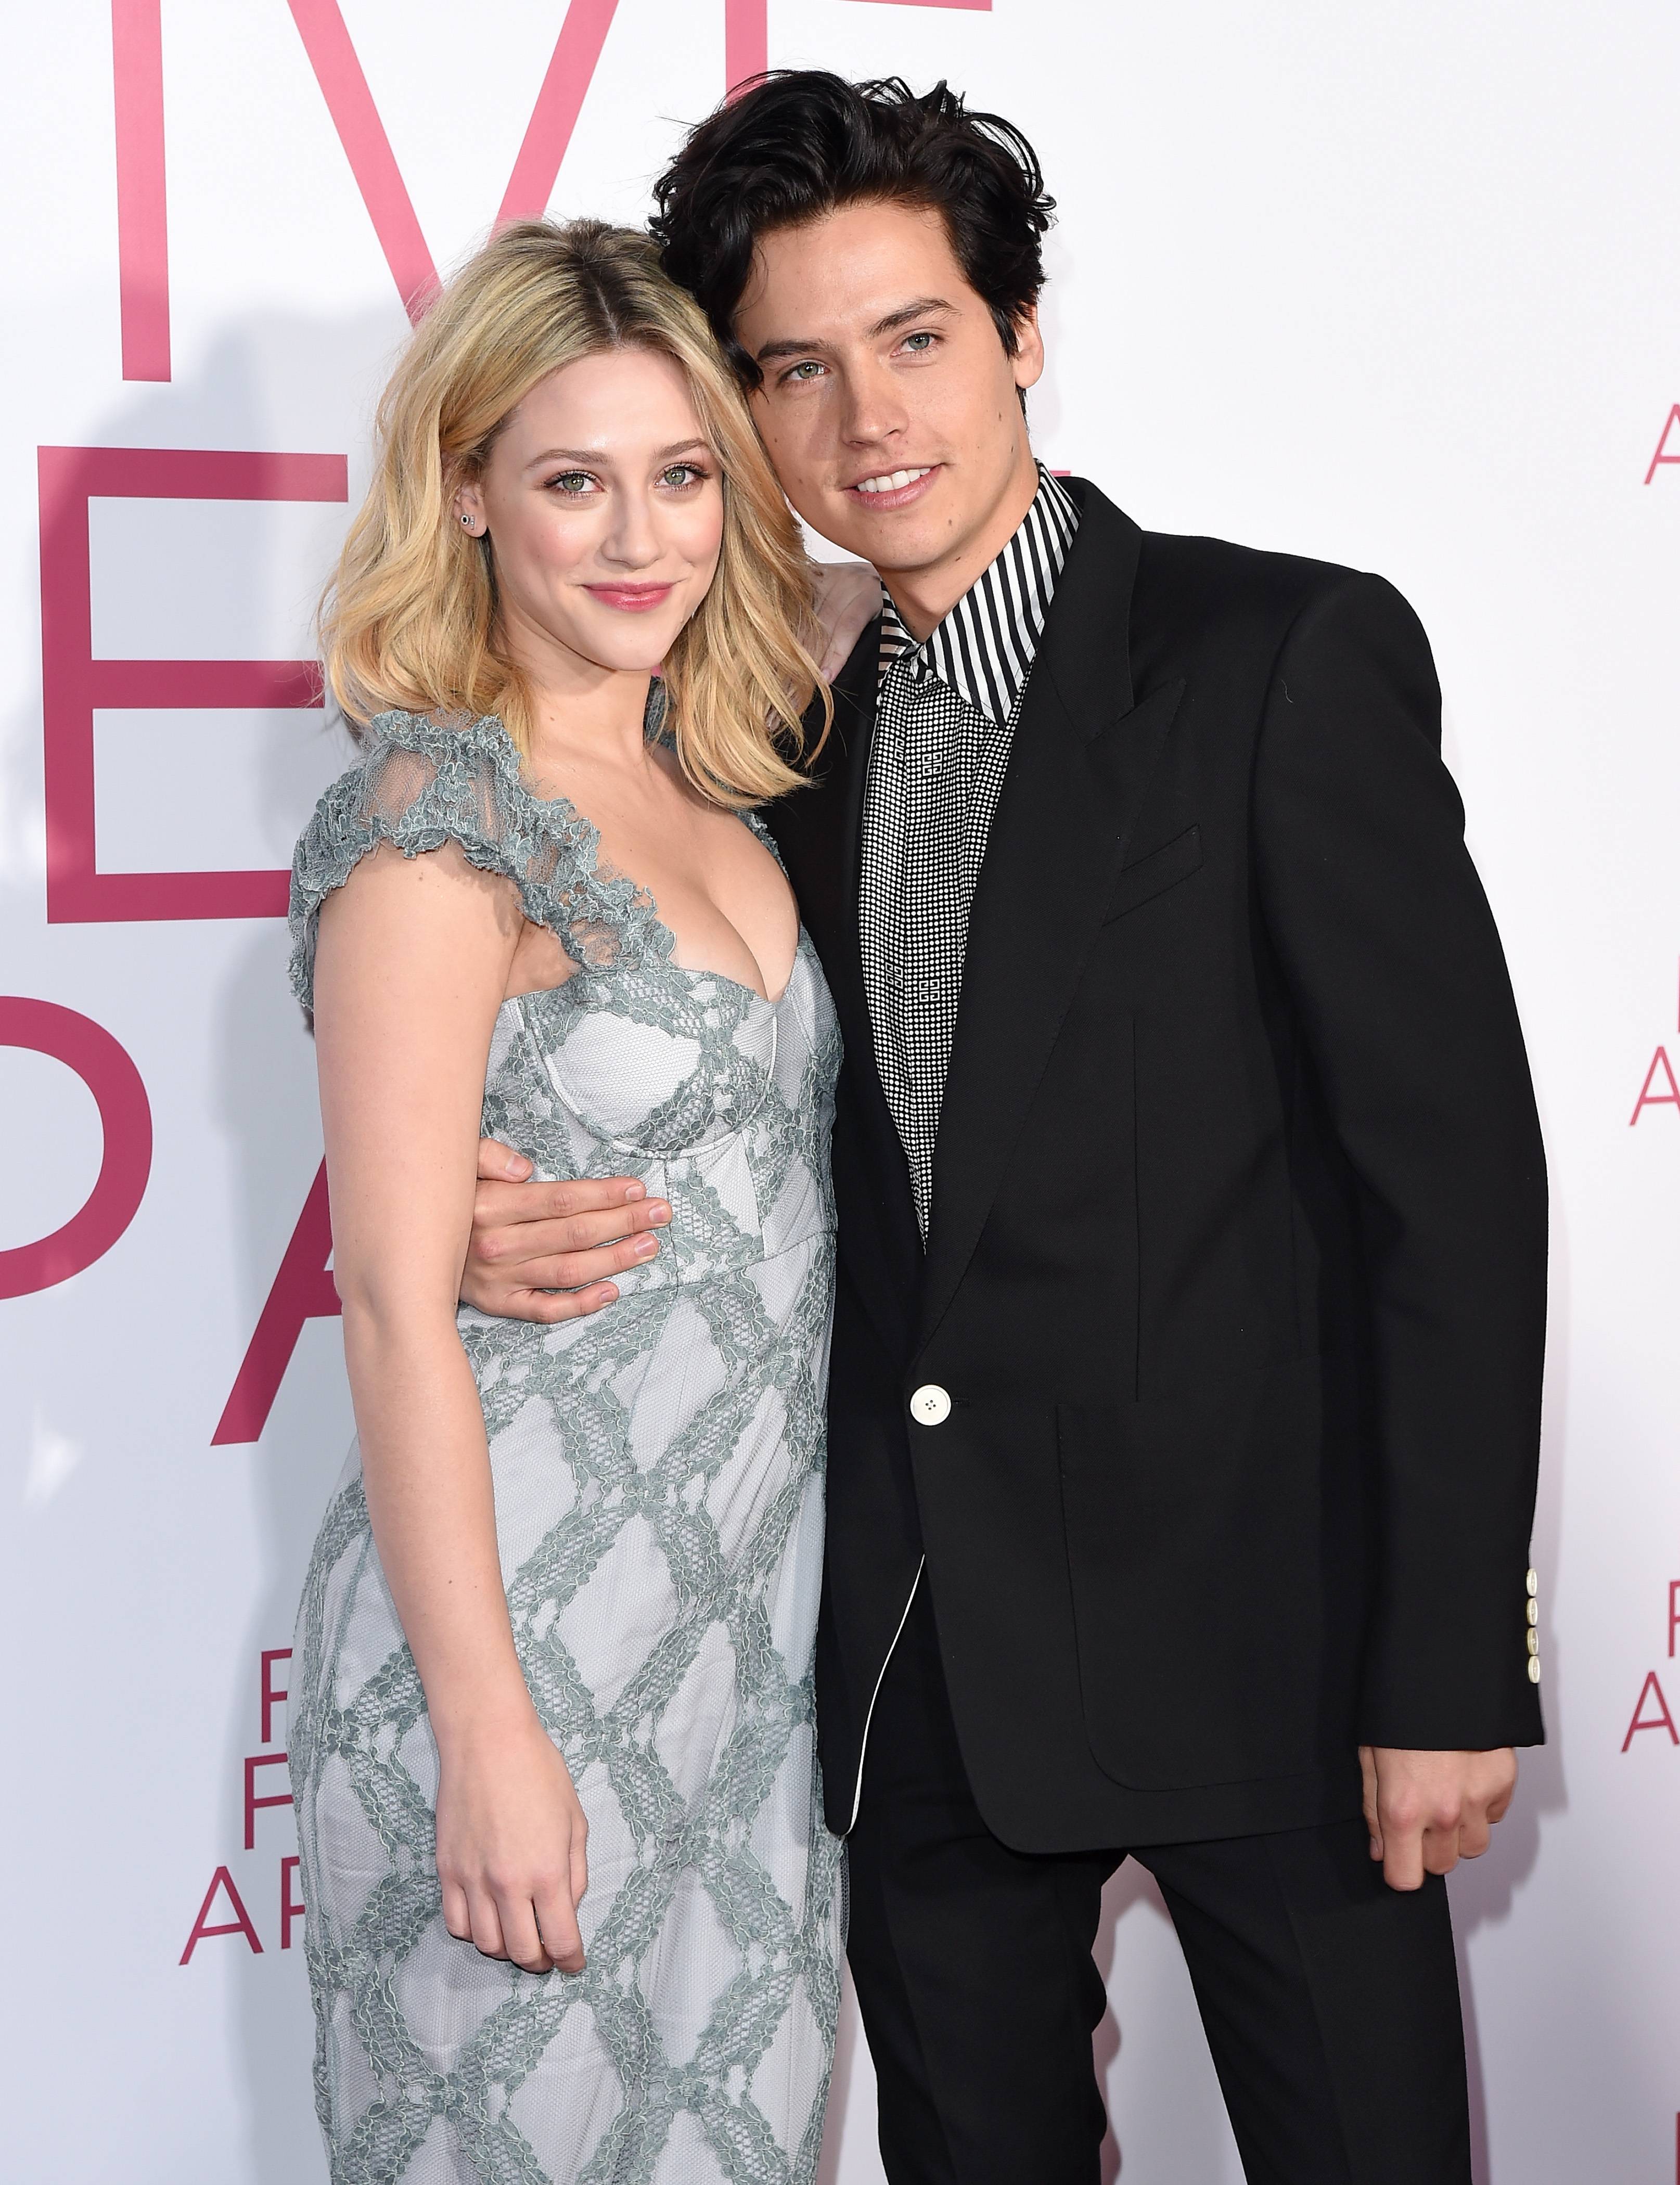 Cole Sprouse Takes A Bite Out Of Lili Reinharts Neck In Steamy New Instagram Pics News Mtv